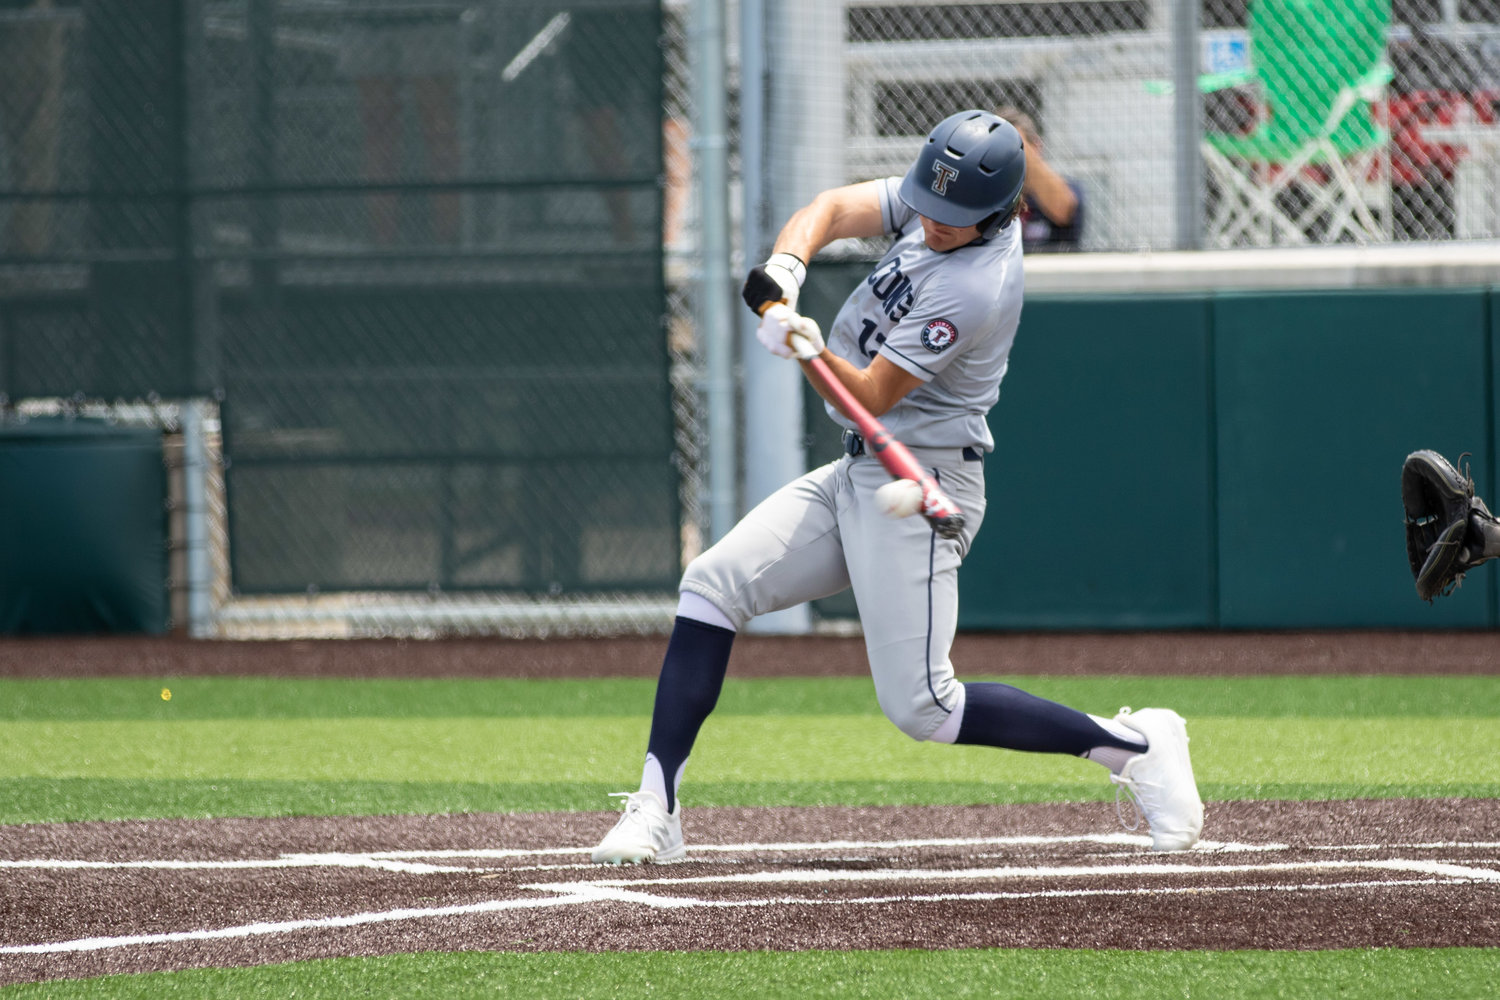 Tompkins junior Jace Laviolette takes a swing during Game 3 of the Falcons’ Region III-6A semifinals against Strake Jesuit on Saturday, May 29, at Cy-Falls High.